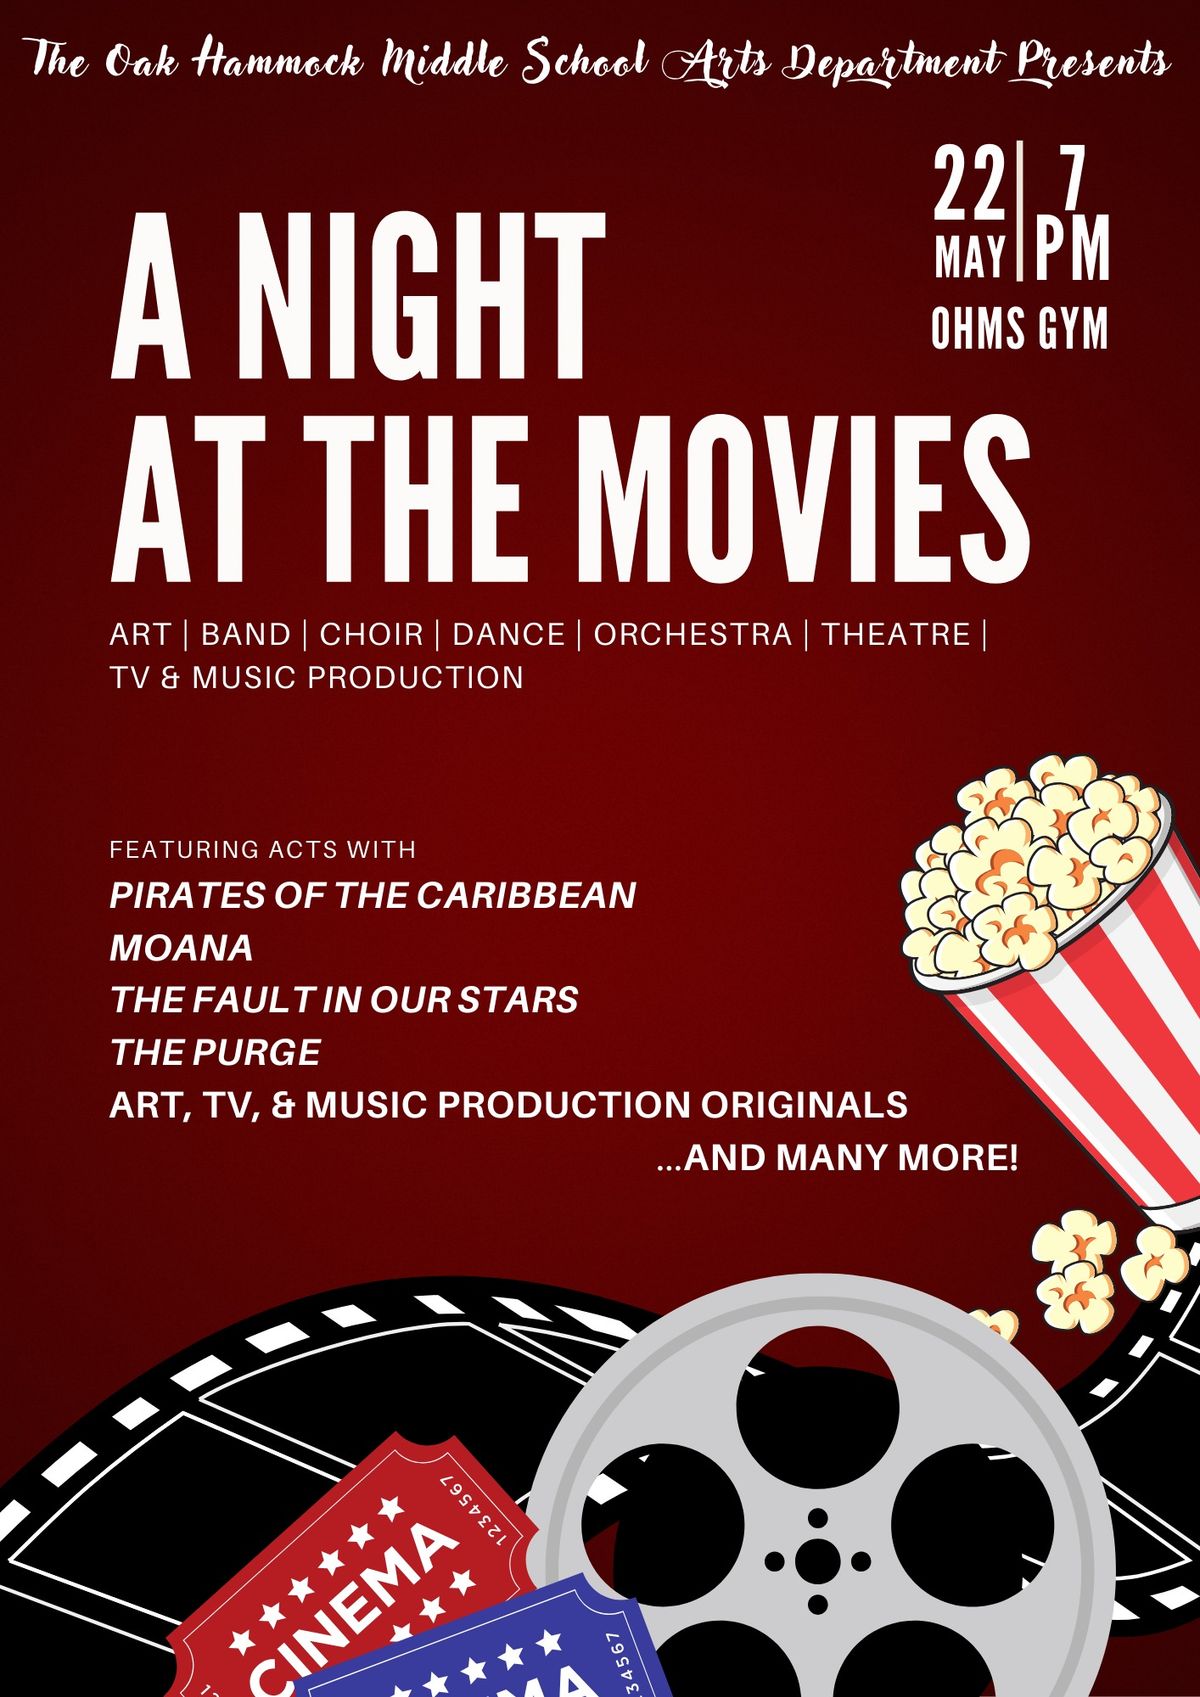 A Night at the Movies! All Arts Show!